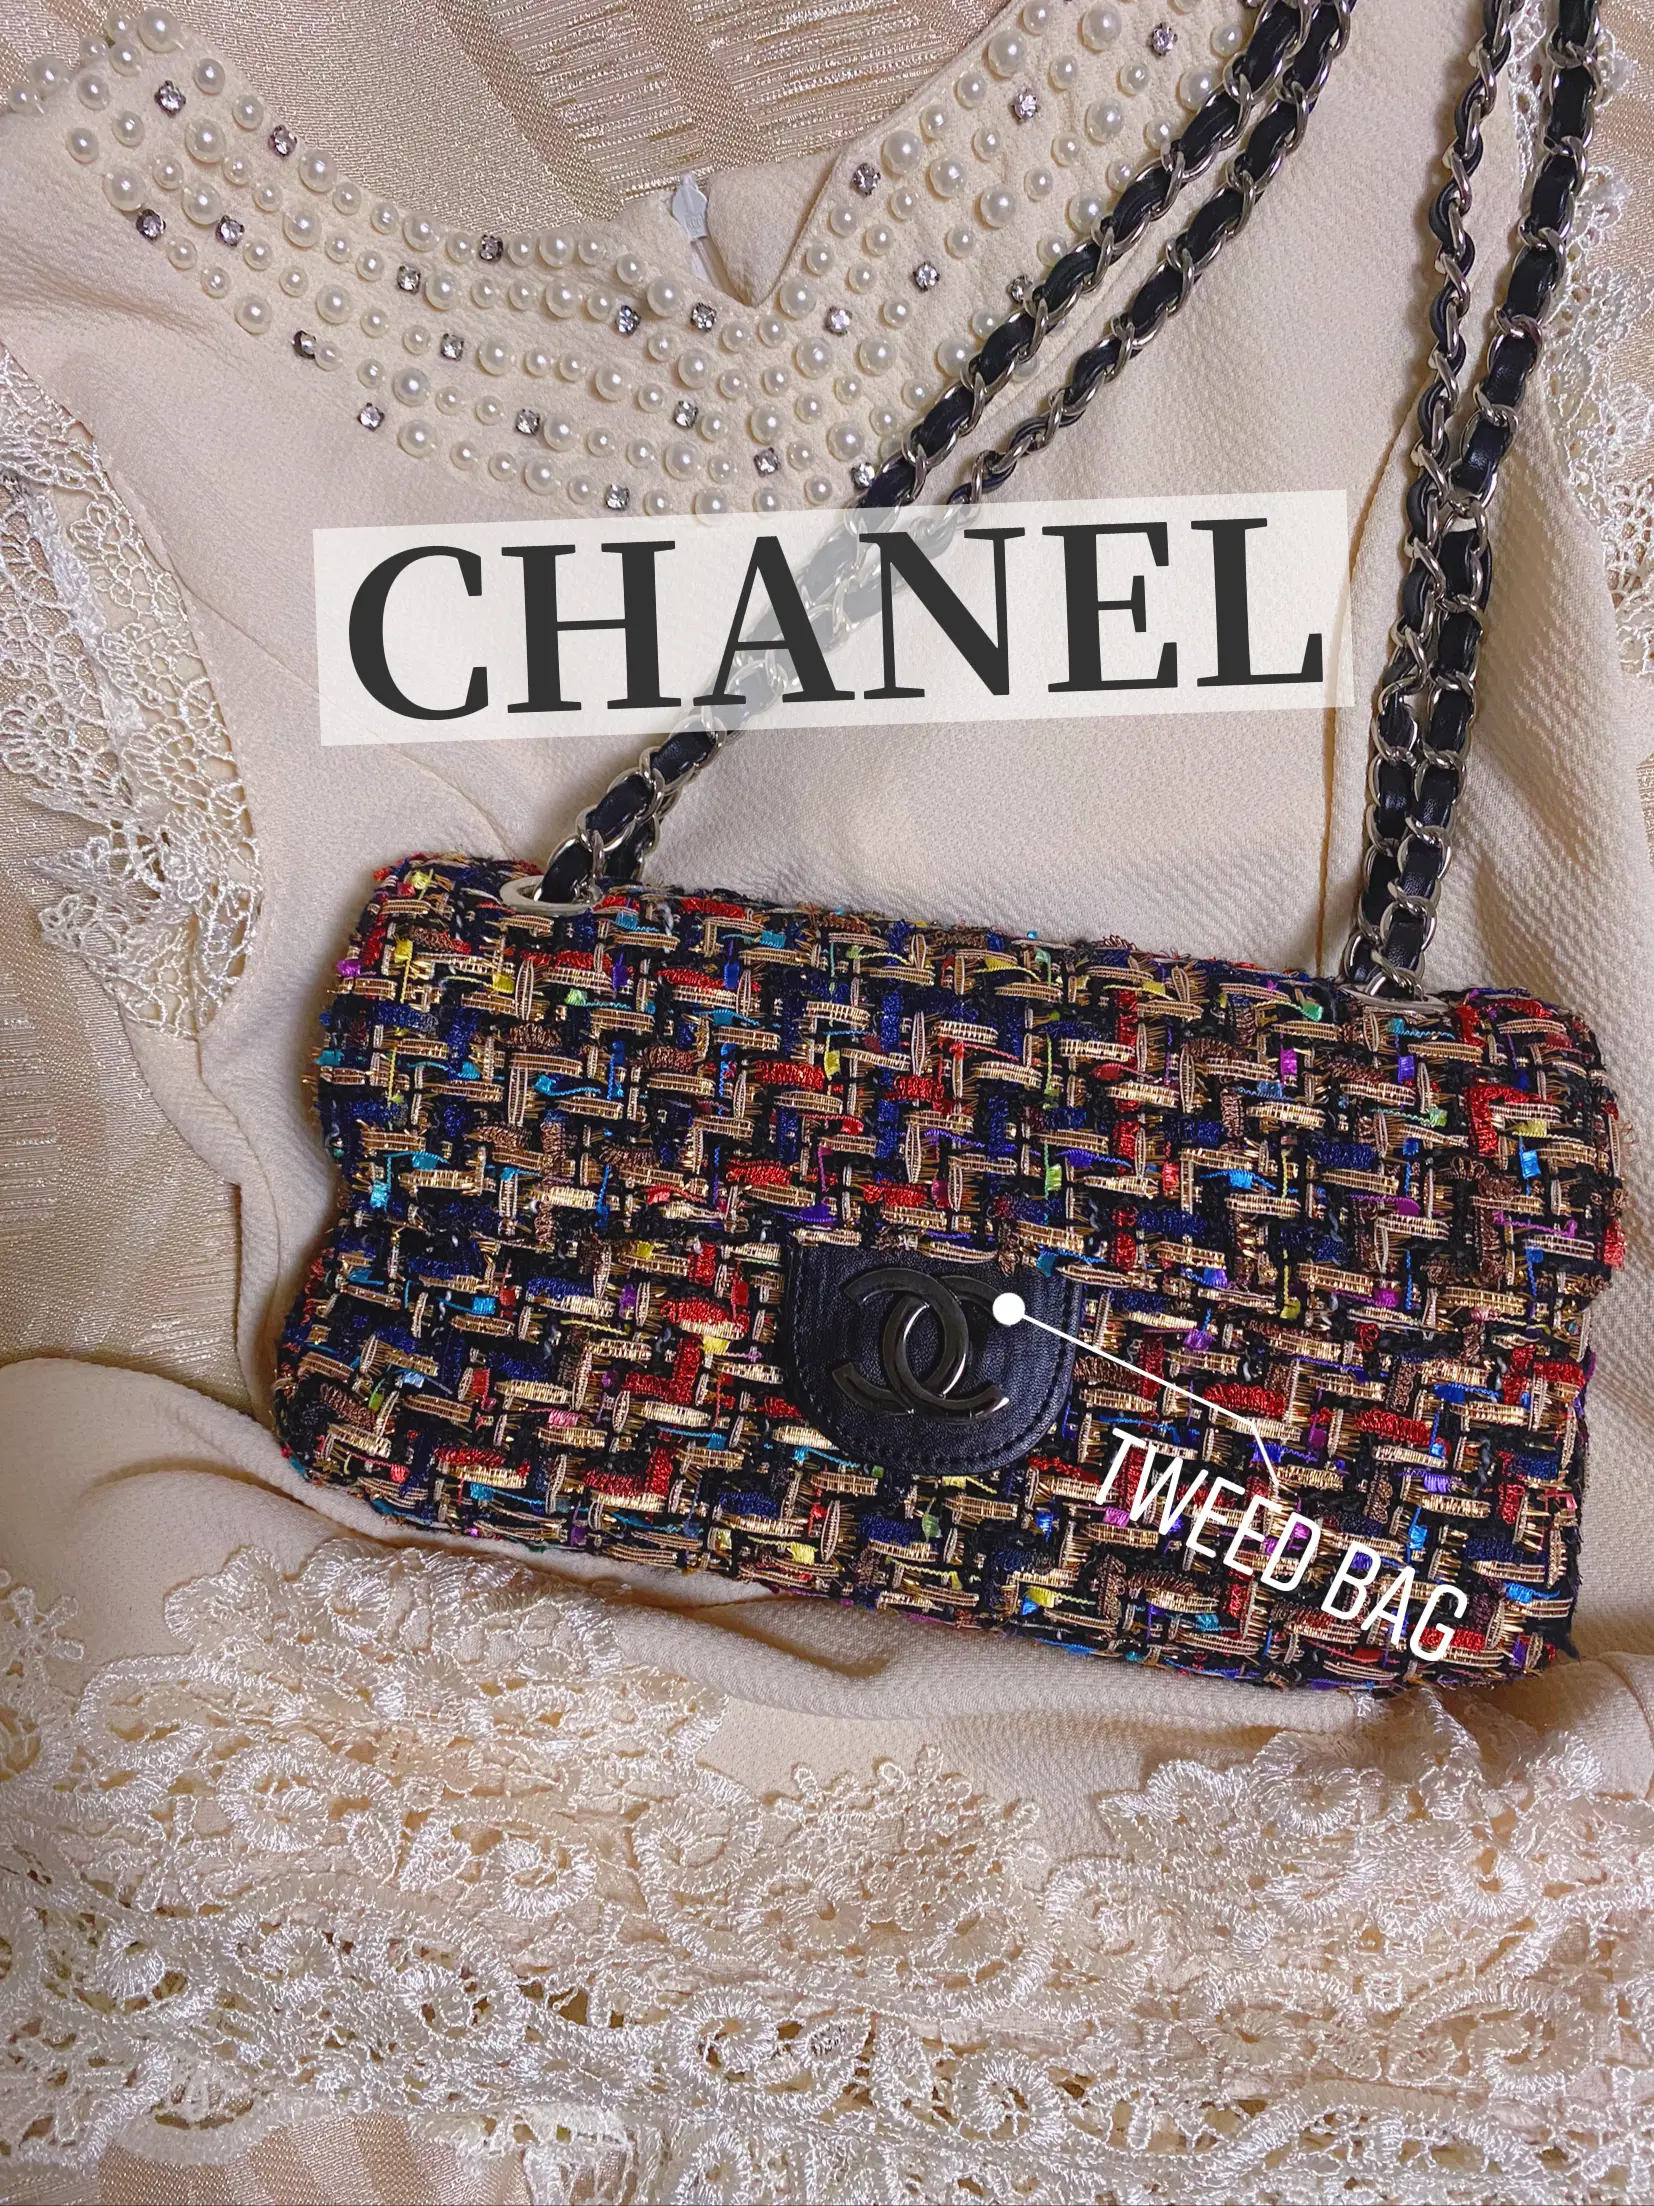 red classic chanel bag